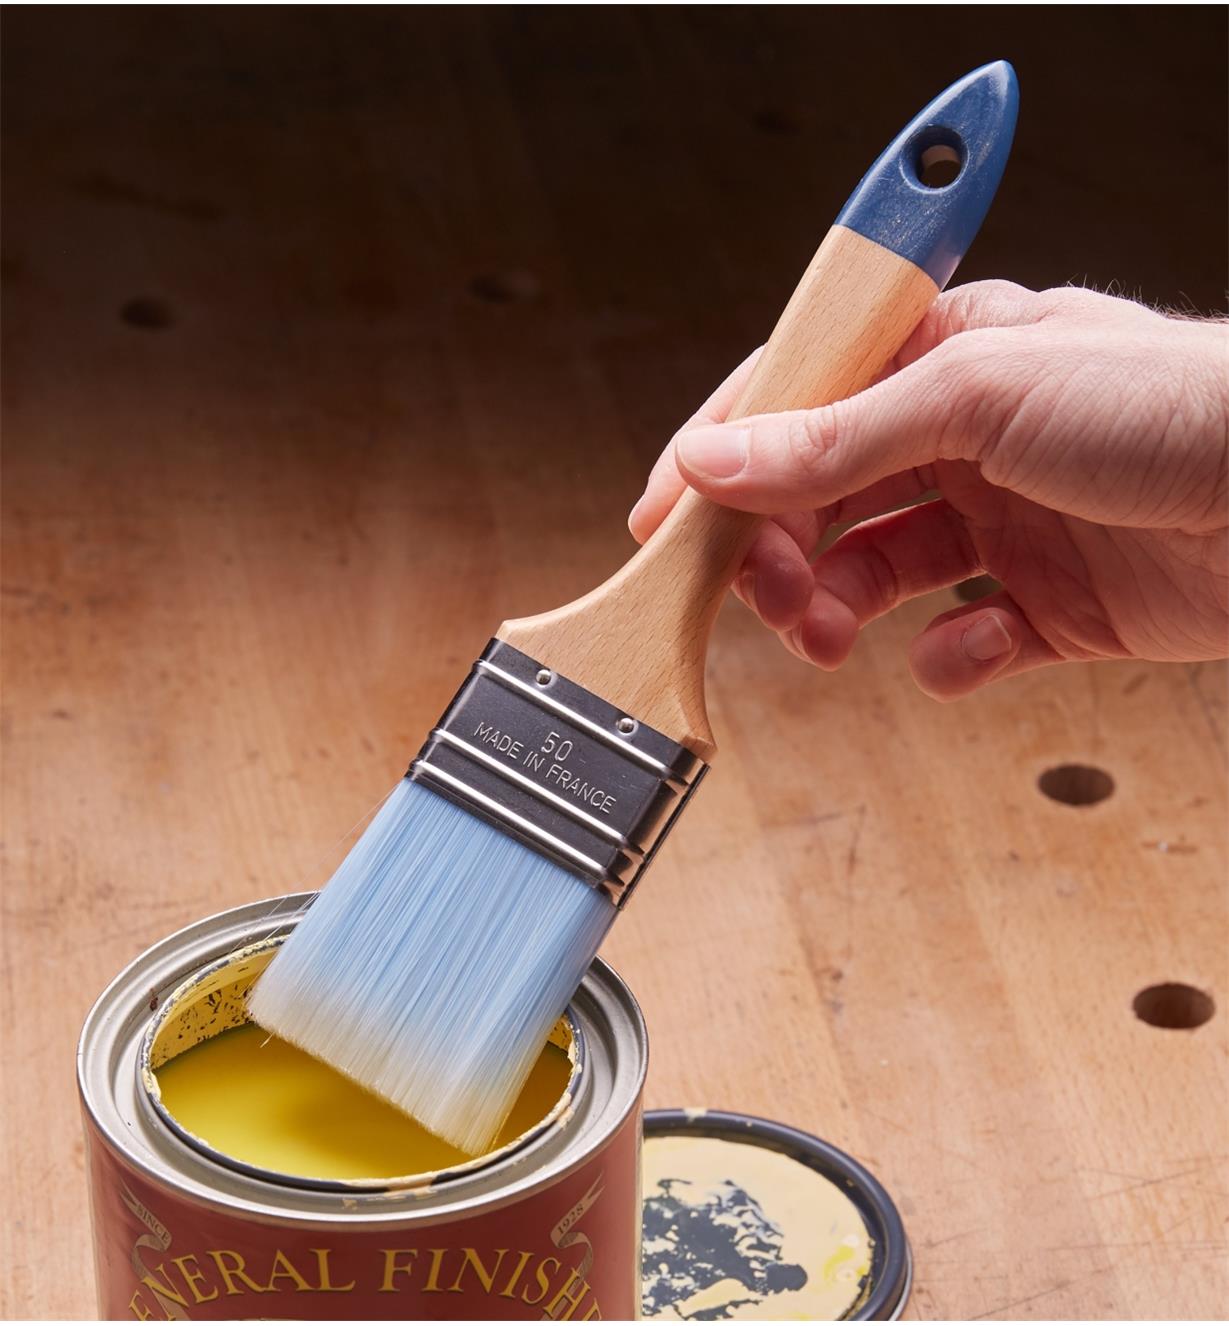 Dipping a Nylon Bristle Brush into a can of paint